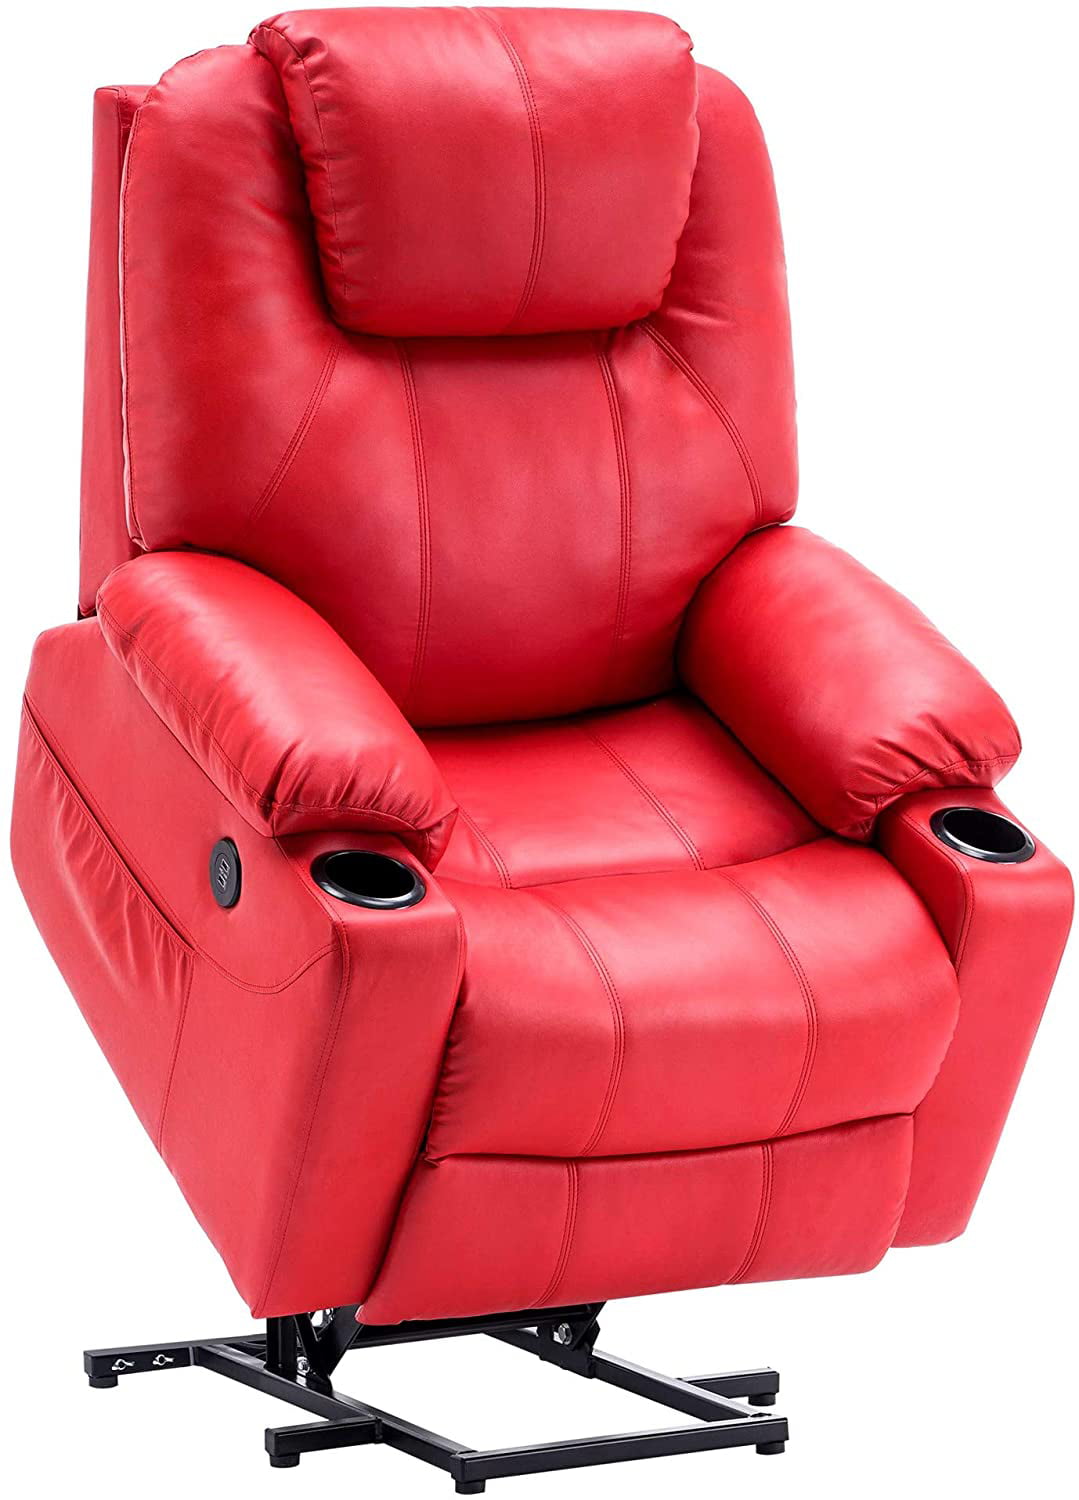 Mcombo Electric Power Lift Recliner Chair Sofa With Massage And Heat For Elderly 3 Positions 2 Side Pockets And Cup Holders Usb Ports Faux Leather 7040 Walmart Com Walmart Com